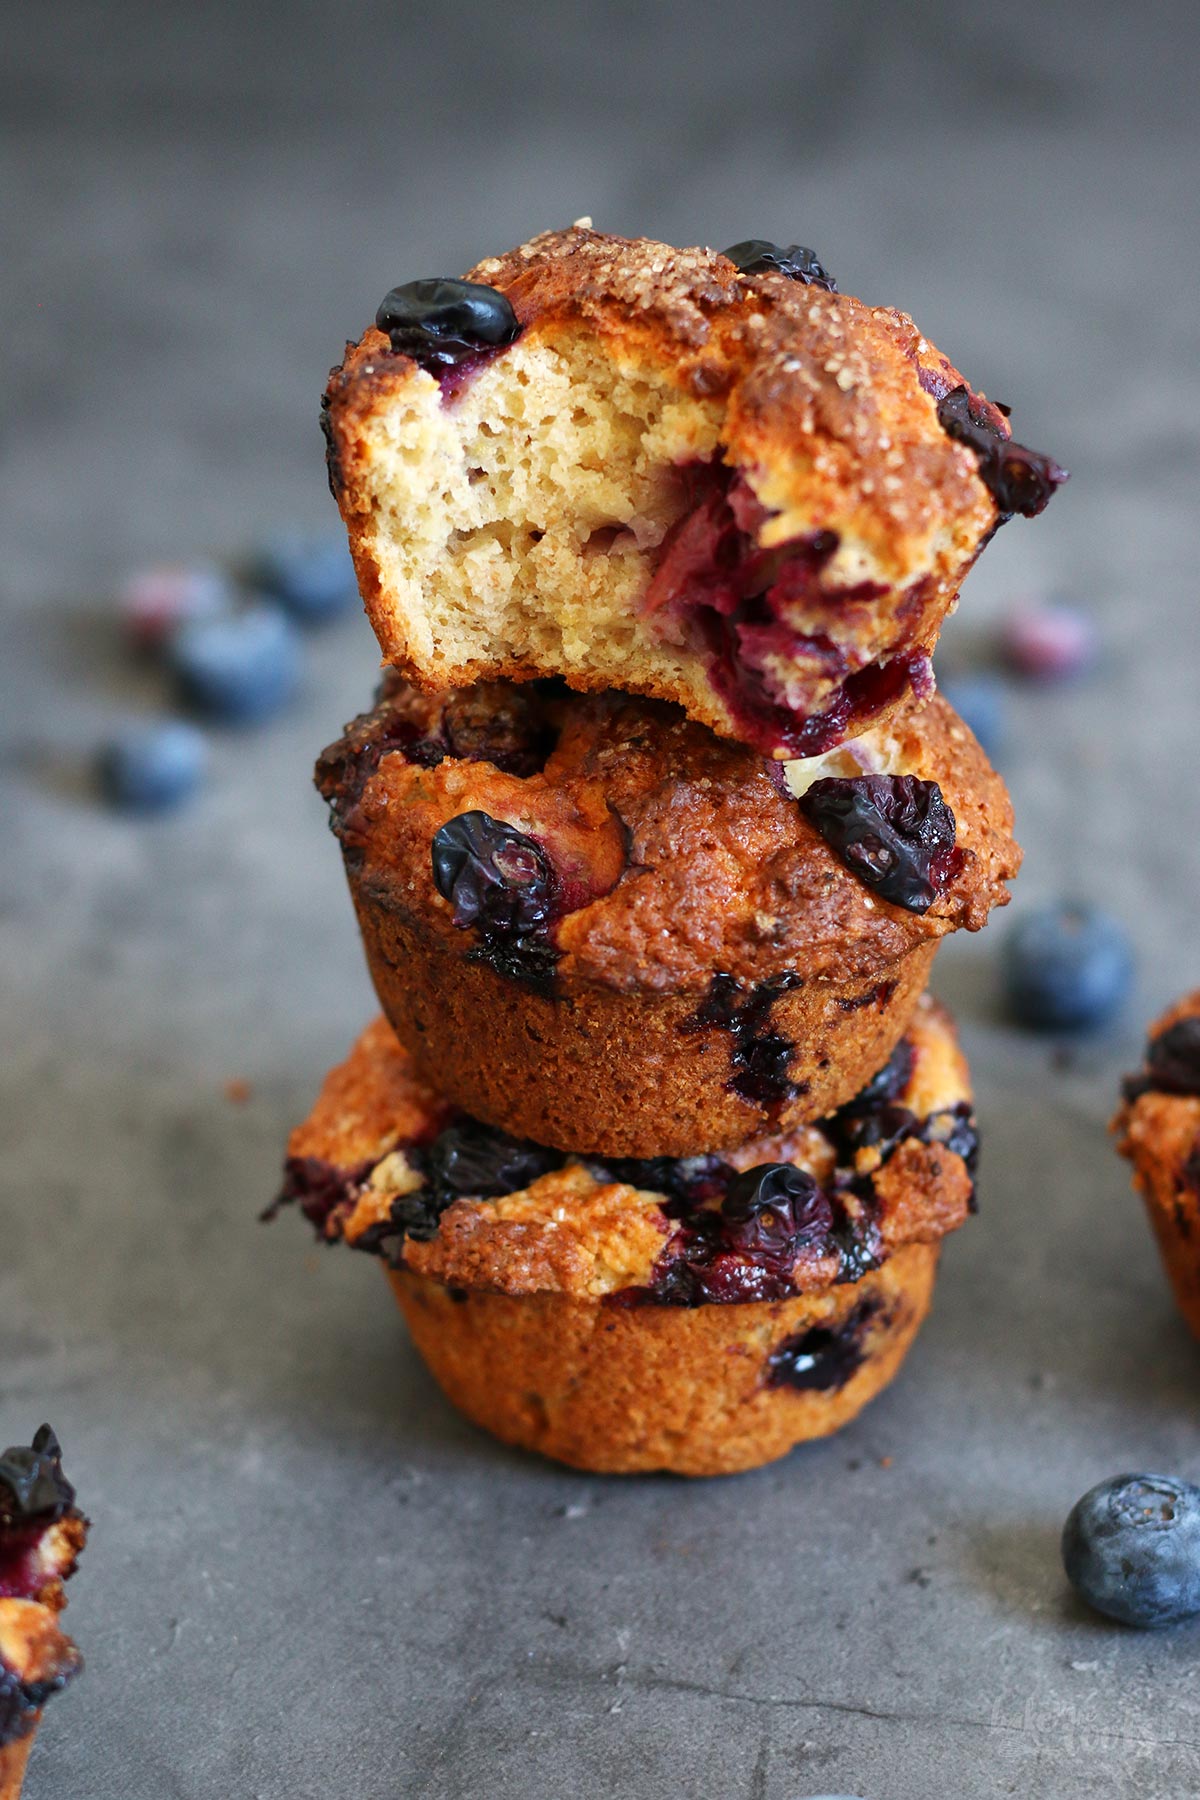 Quick & Easy Blueberry Muffins | Bake to the roots